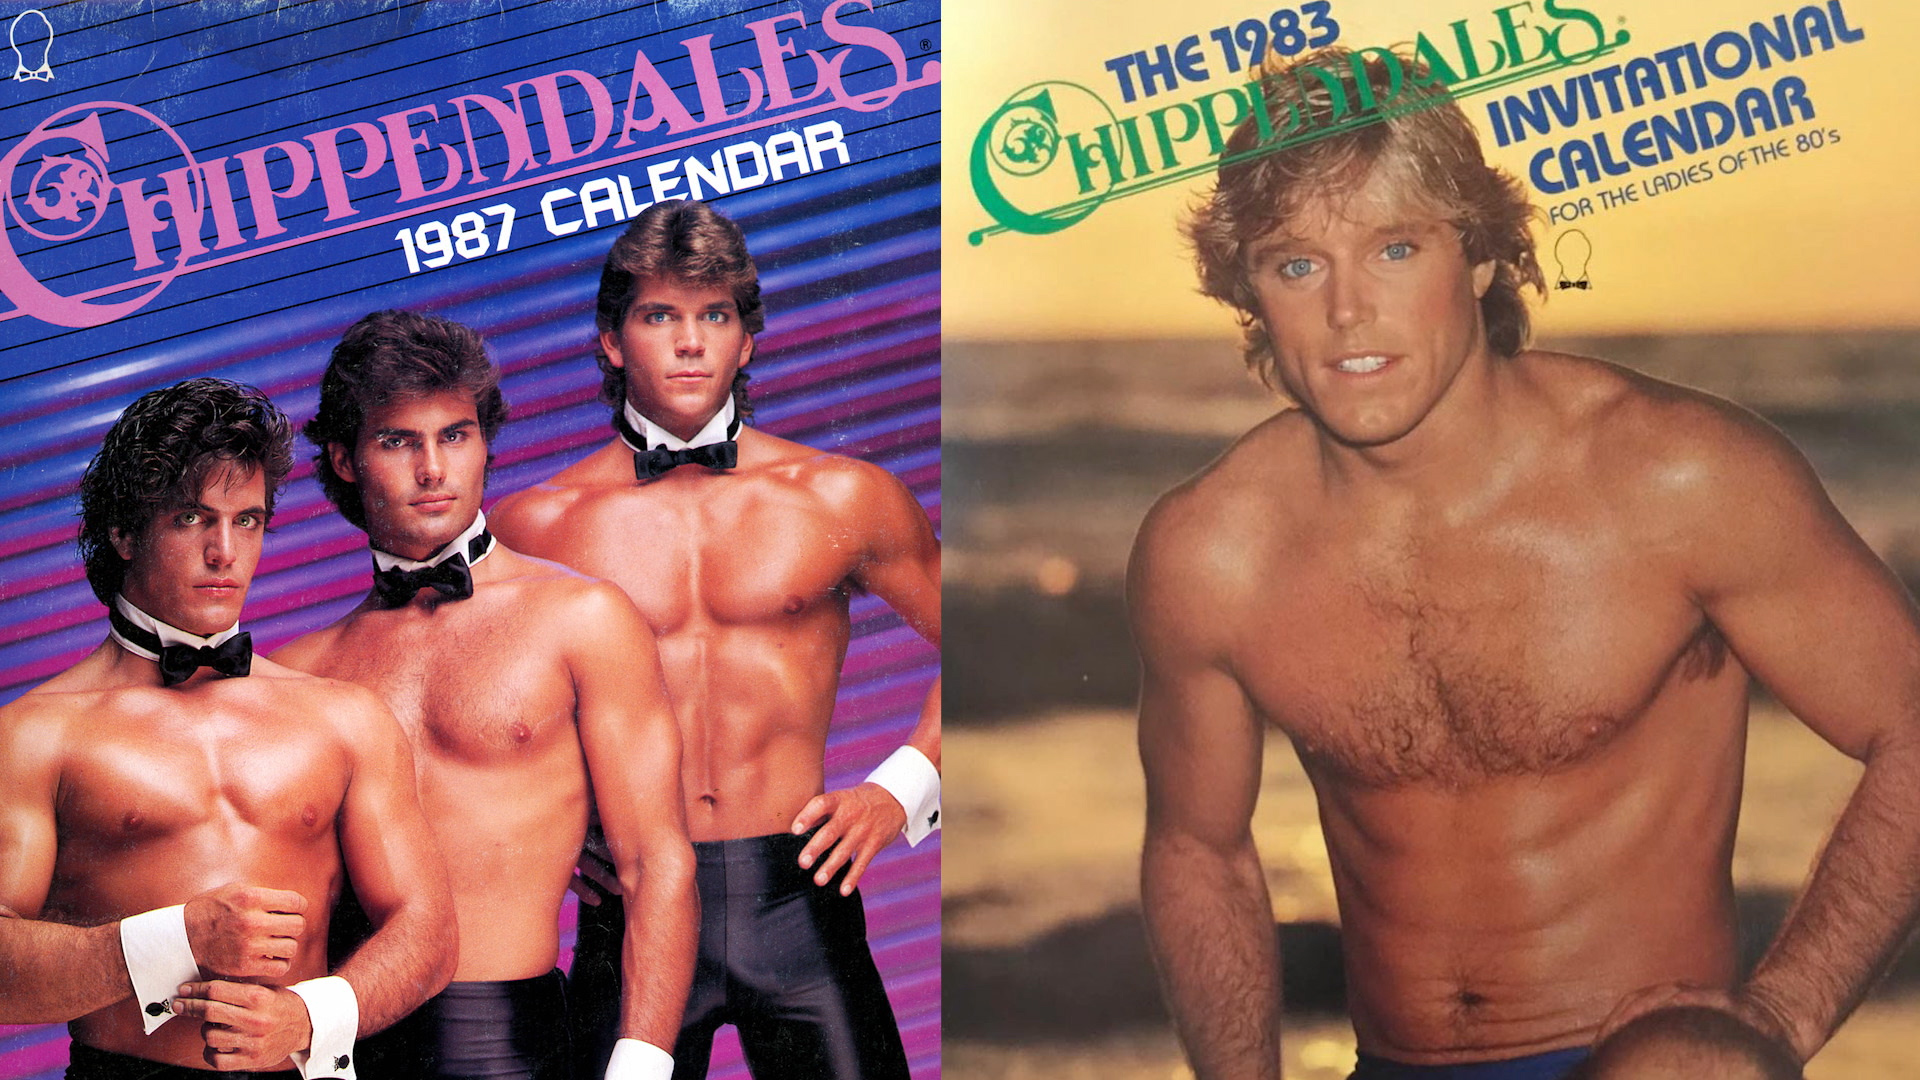 Secrets Of The Chippendales Murders